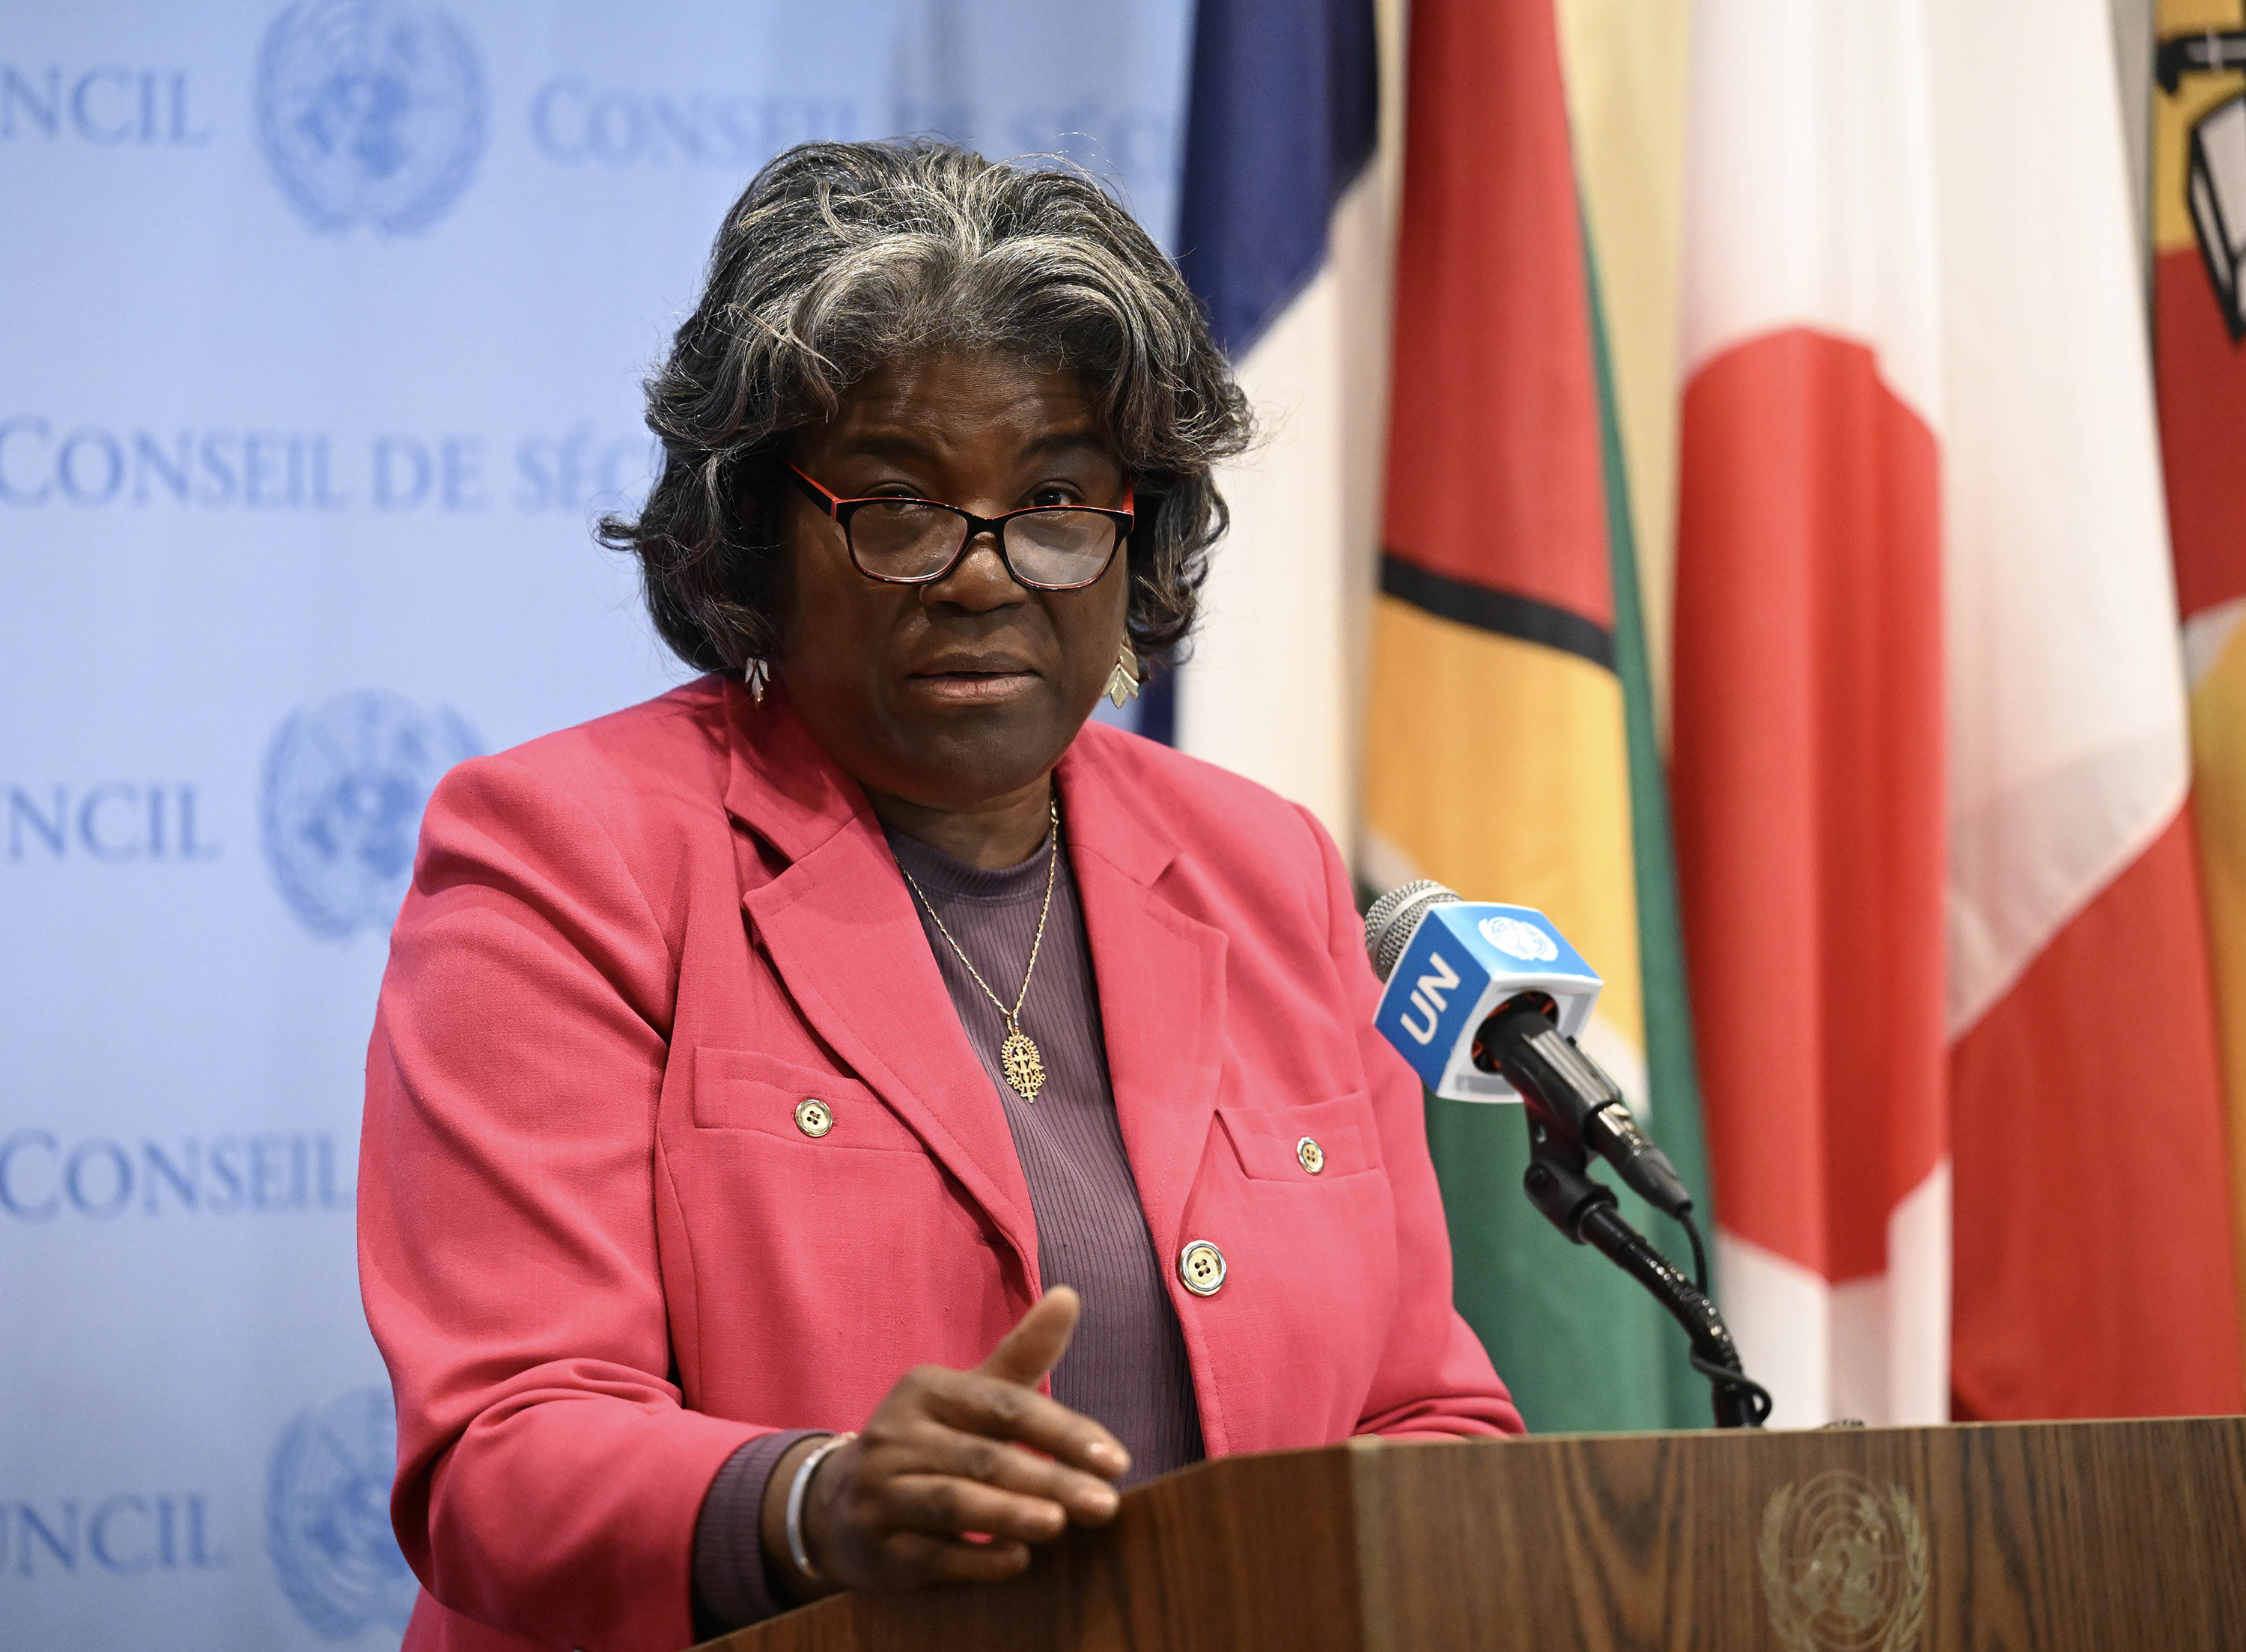 US ambassador to the United Nations, Linda Thomas-Greenfield, delivers remarks on the United Nations Relief and Works Agency for Palestine Refugees in the Near East (UNRWA) at the United Nations Headquarters in New York, on January 30.